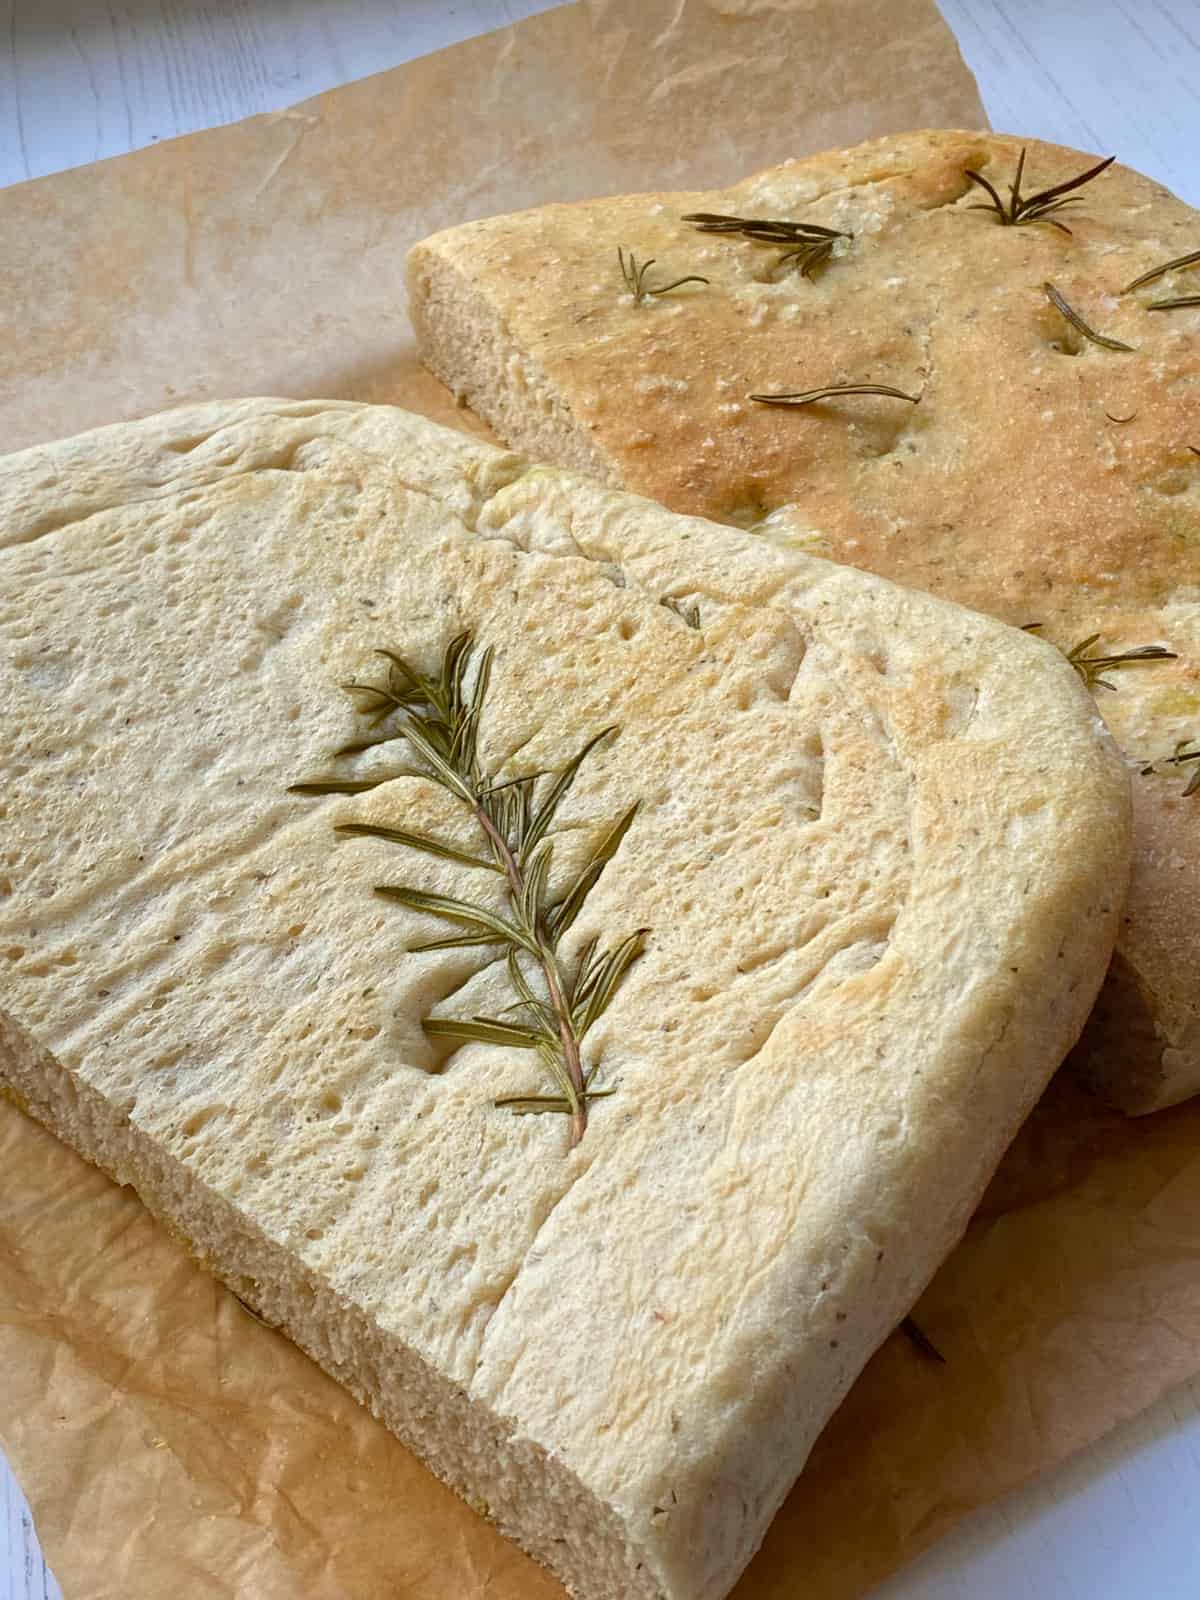 Focaccia sliced showing the two halves.